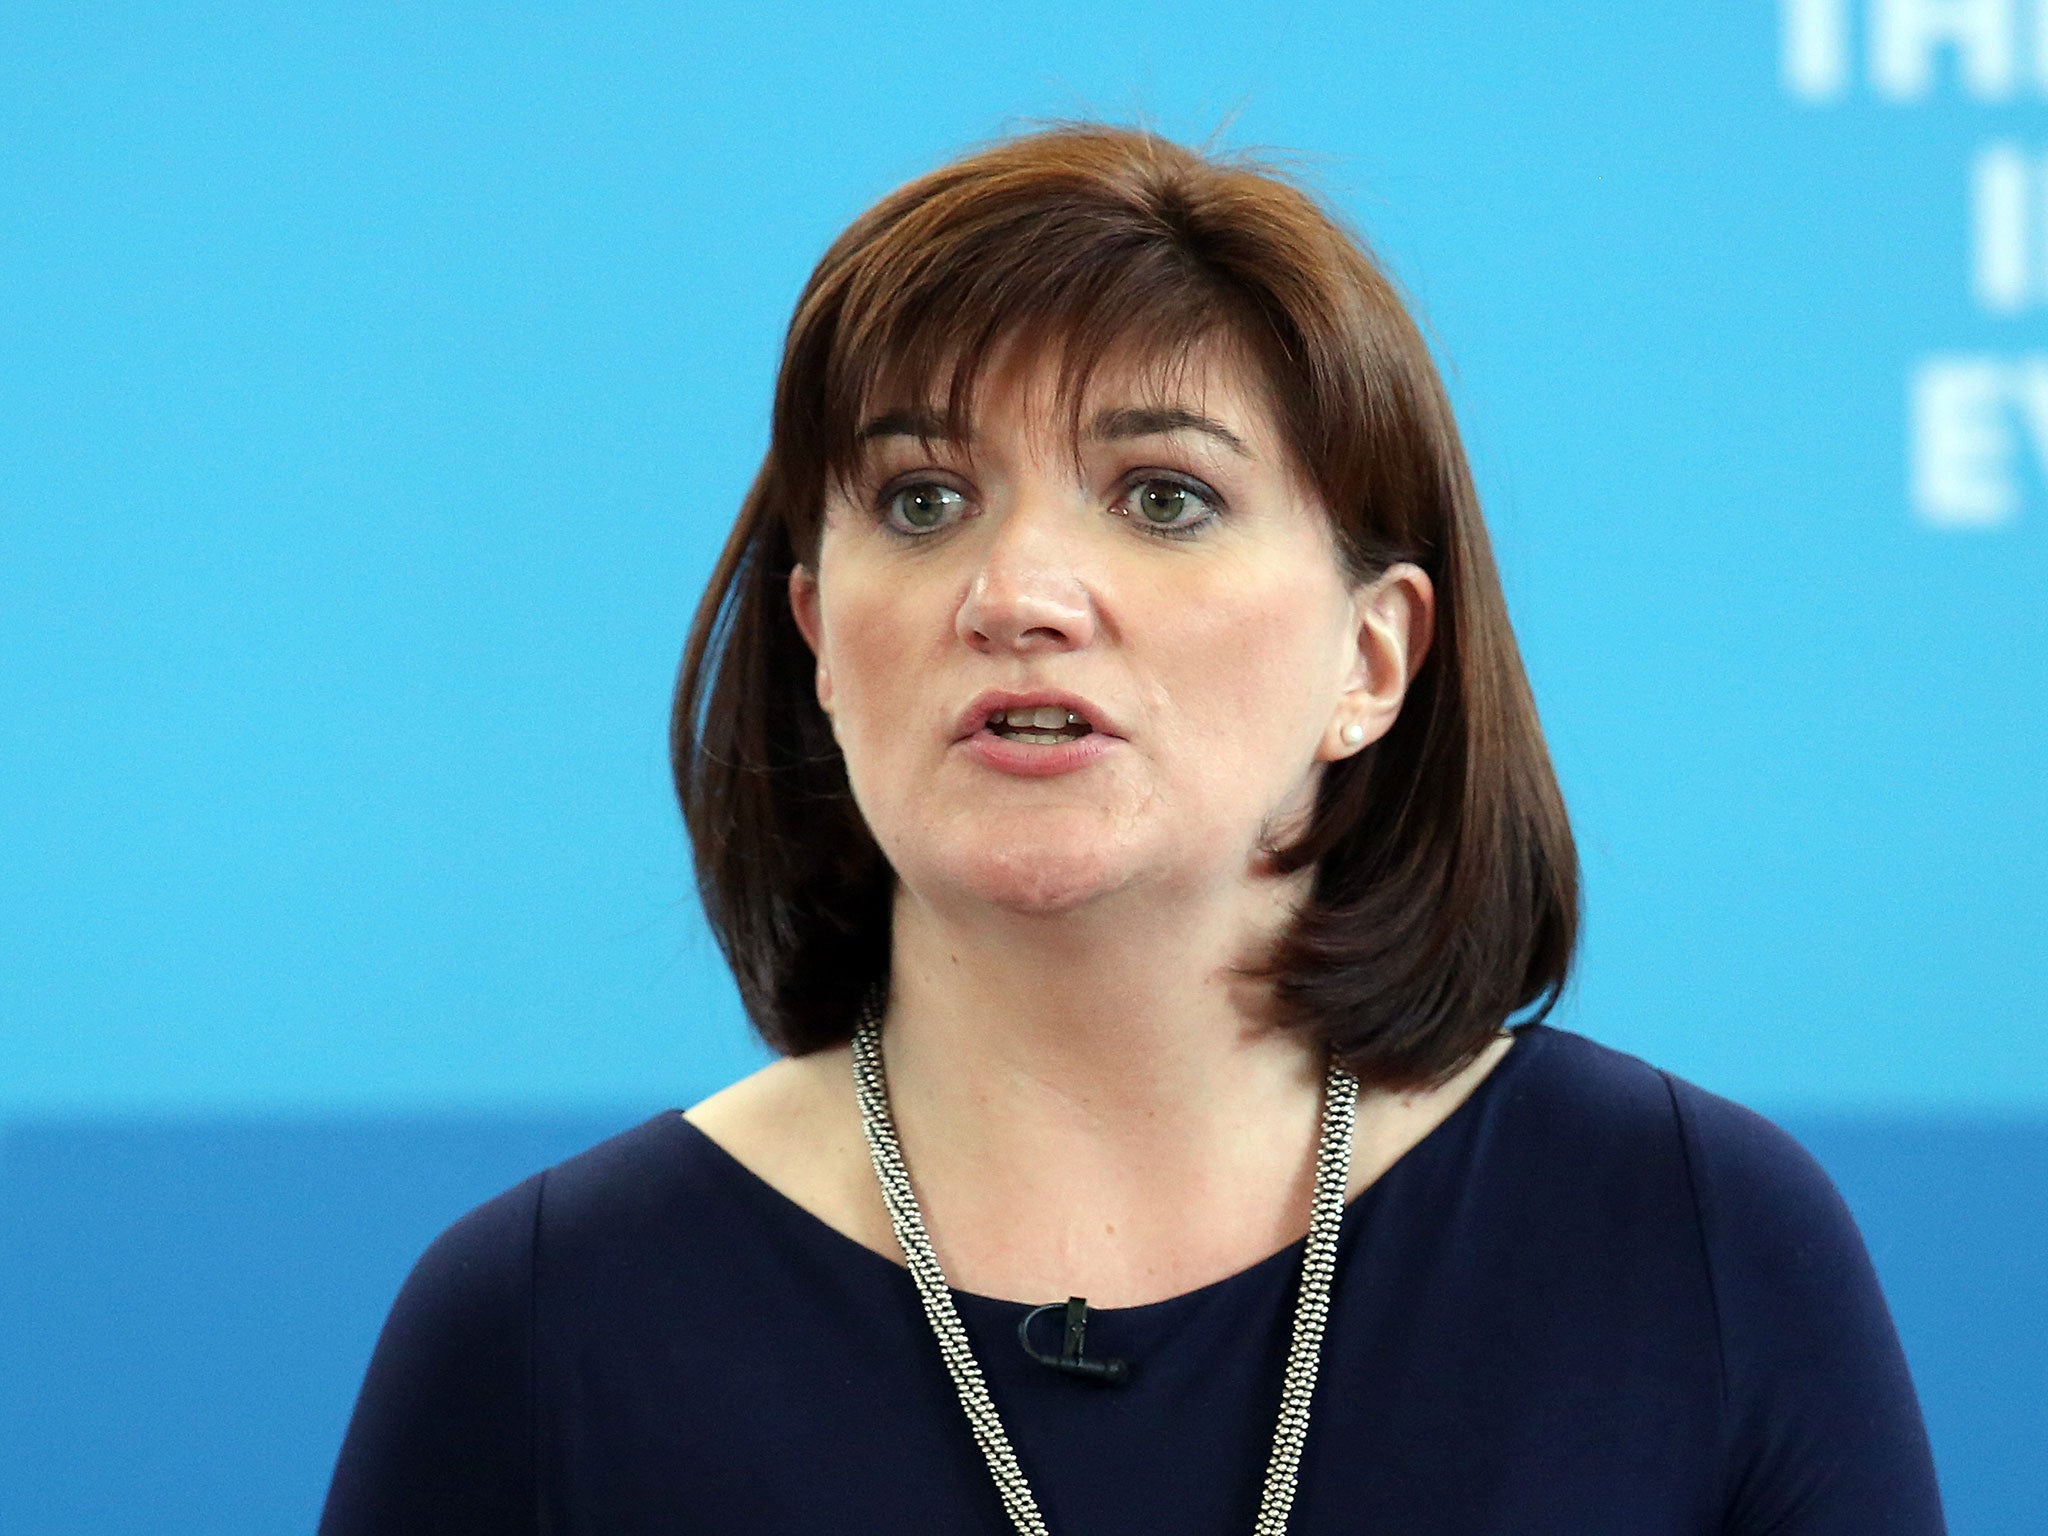 Nicky Morgan has called for the “outdated snobbery” against apprenticeships to be tackled